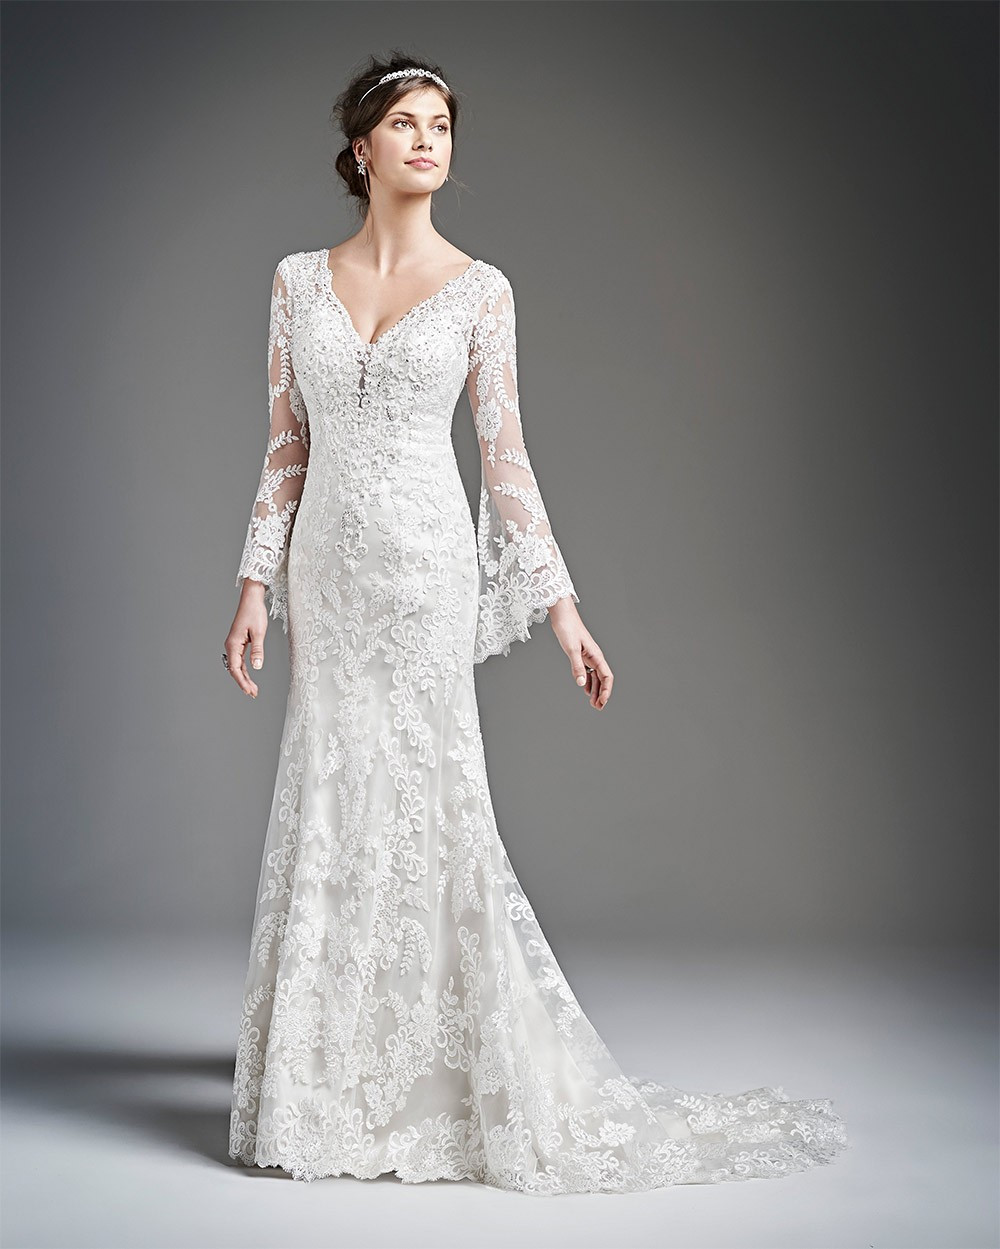 Mature Wedding Gowns
 21 Wedding Dresses for Older Brides Top Tips and Advice